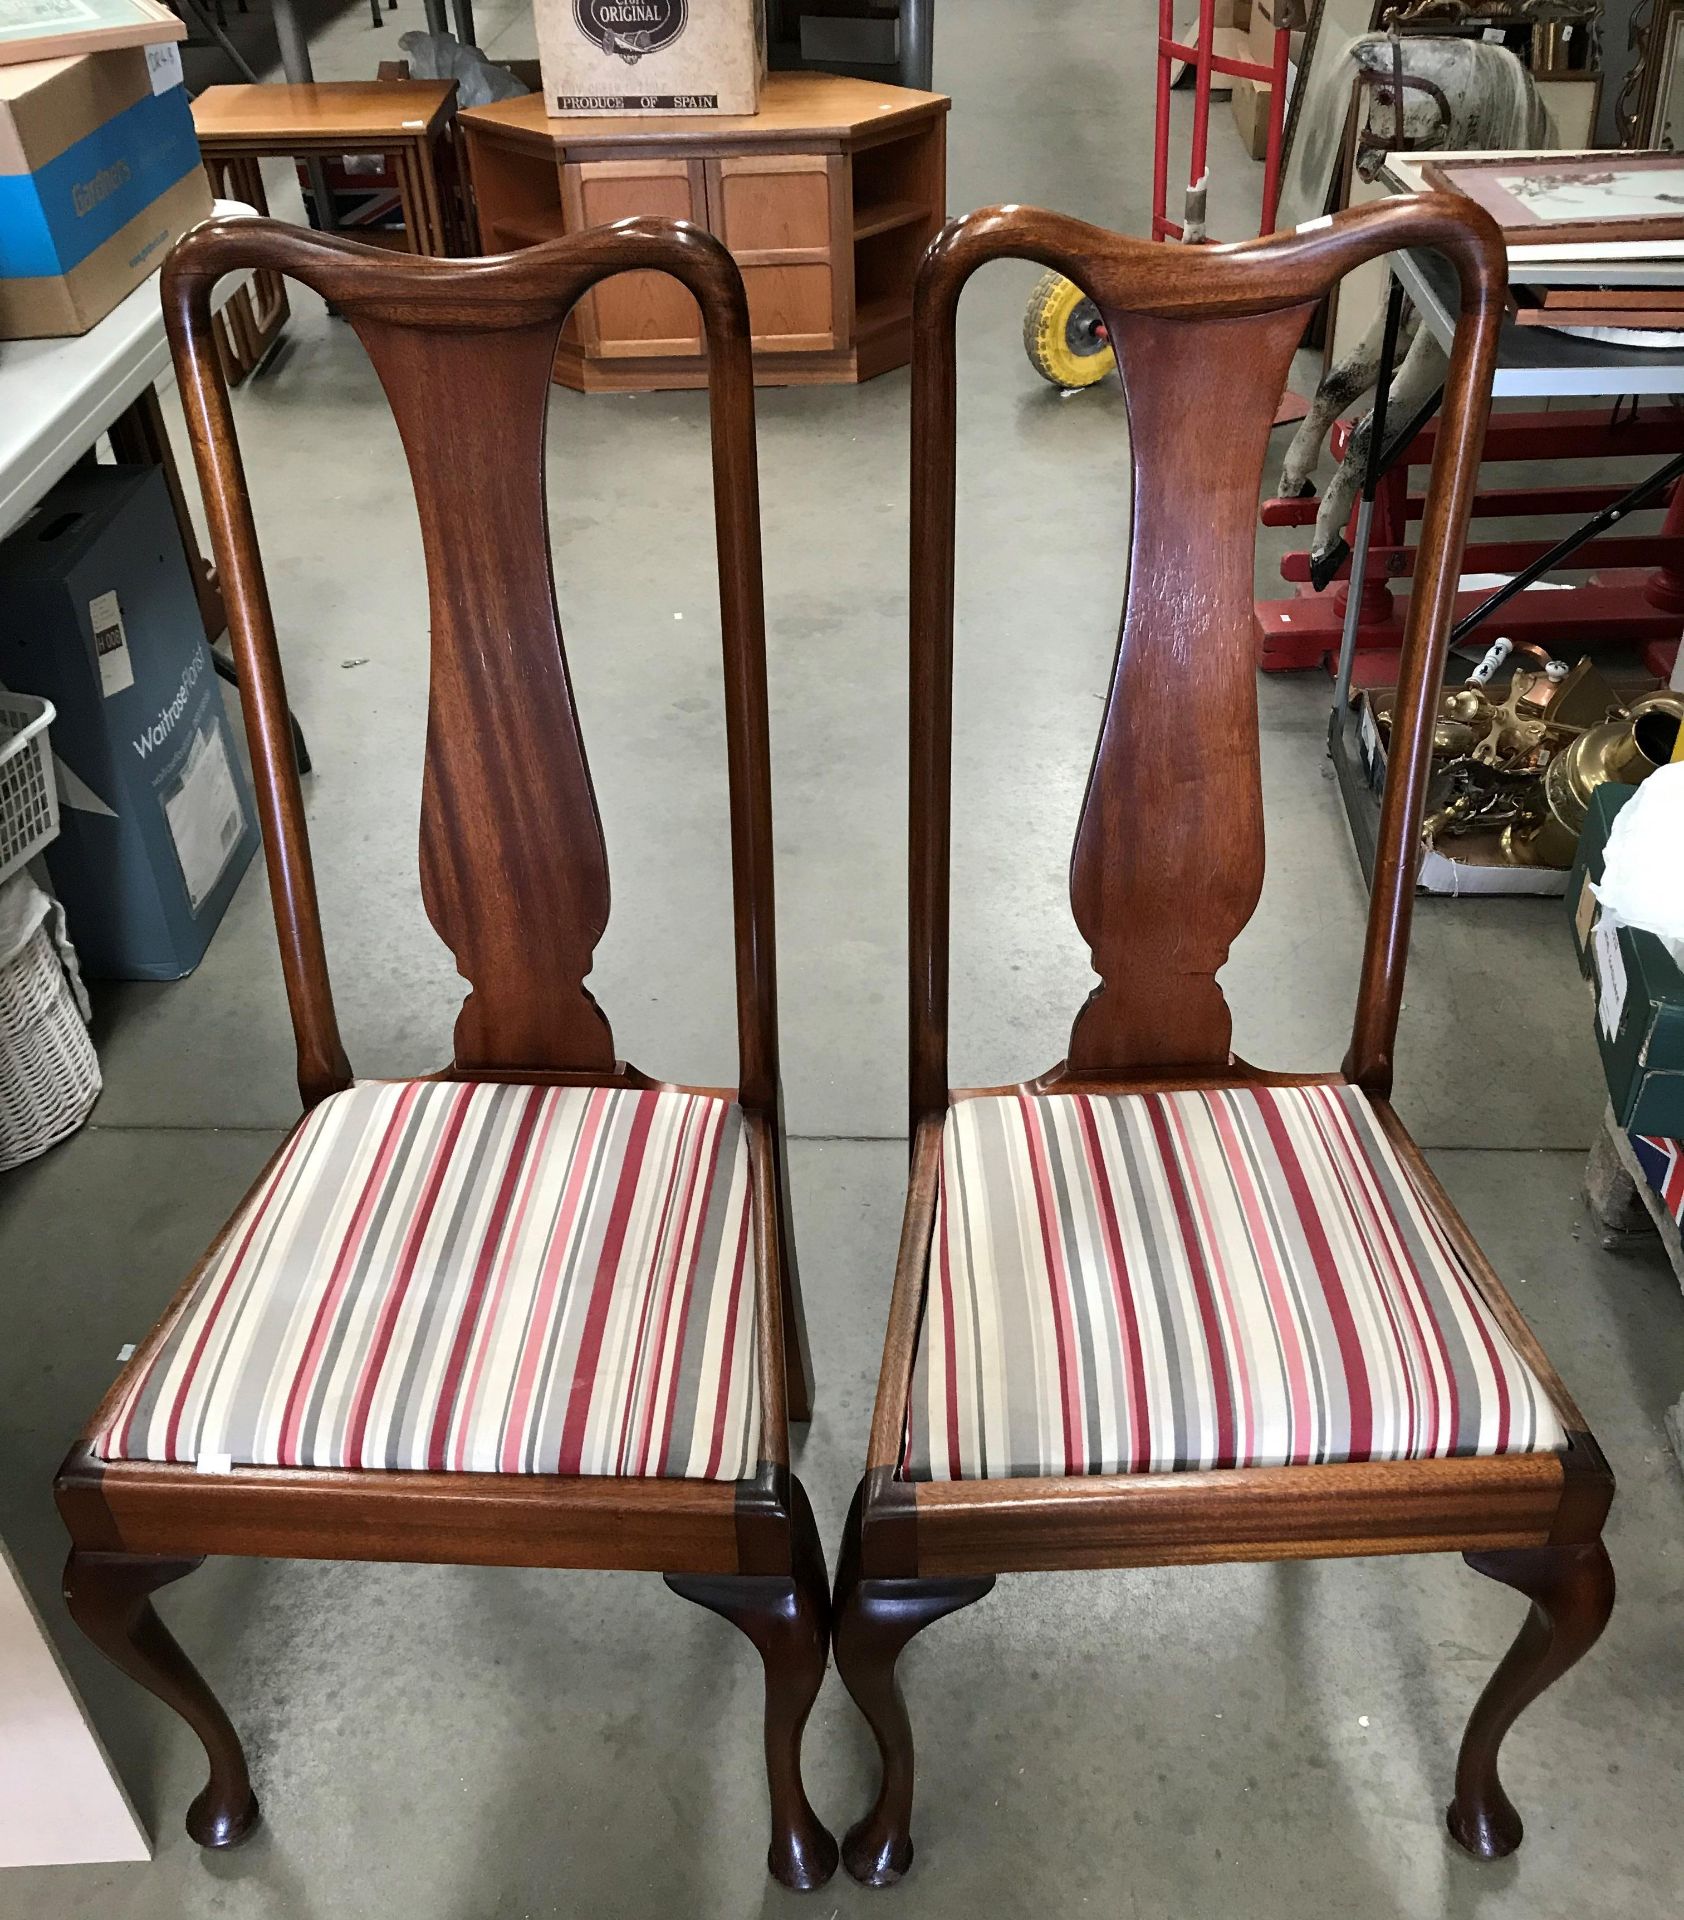 Four 1930s mahogany framed Queen Anne style dining chairs with grey/red and cream striped - Image 2 of 2